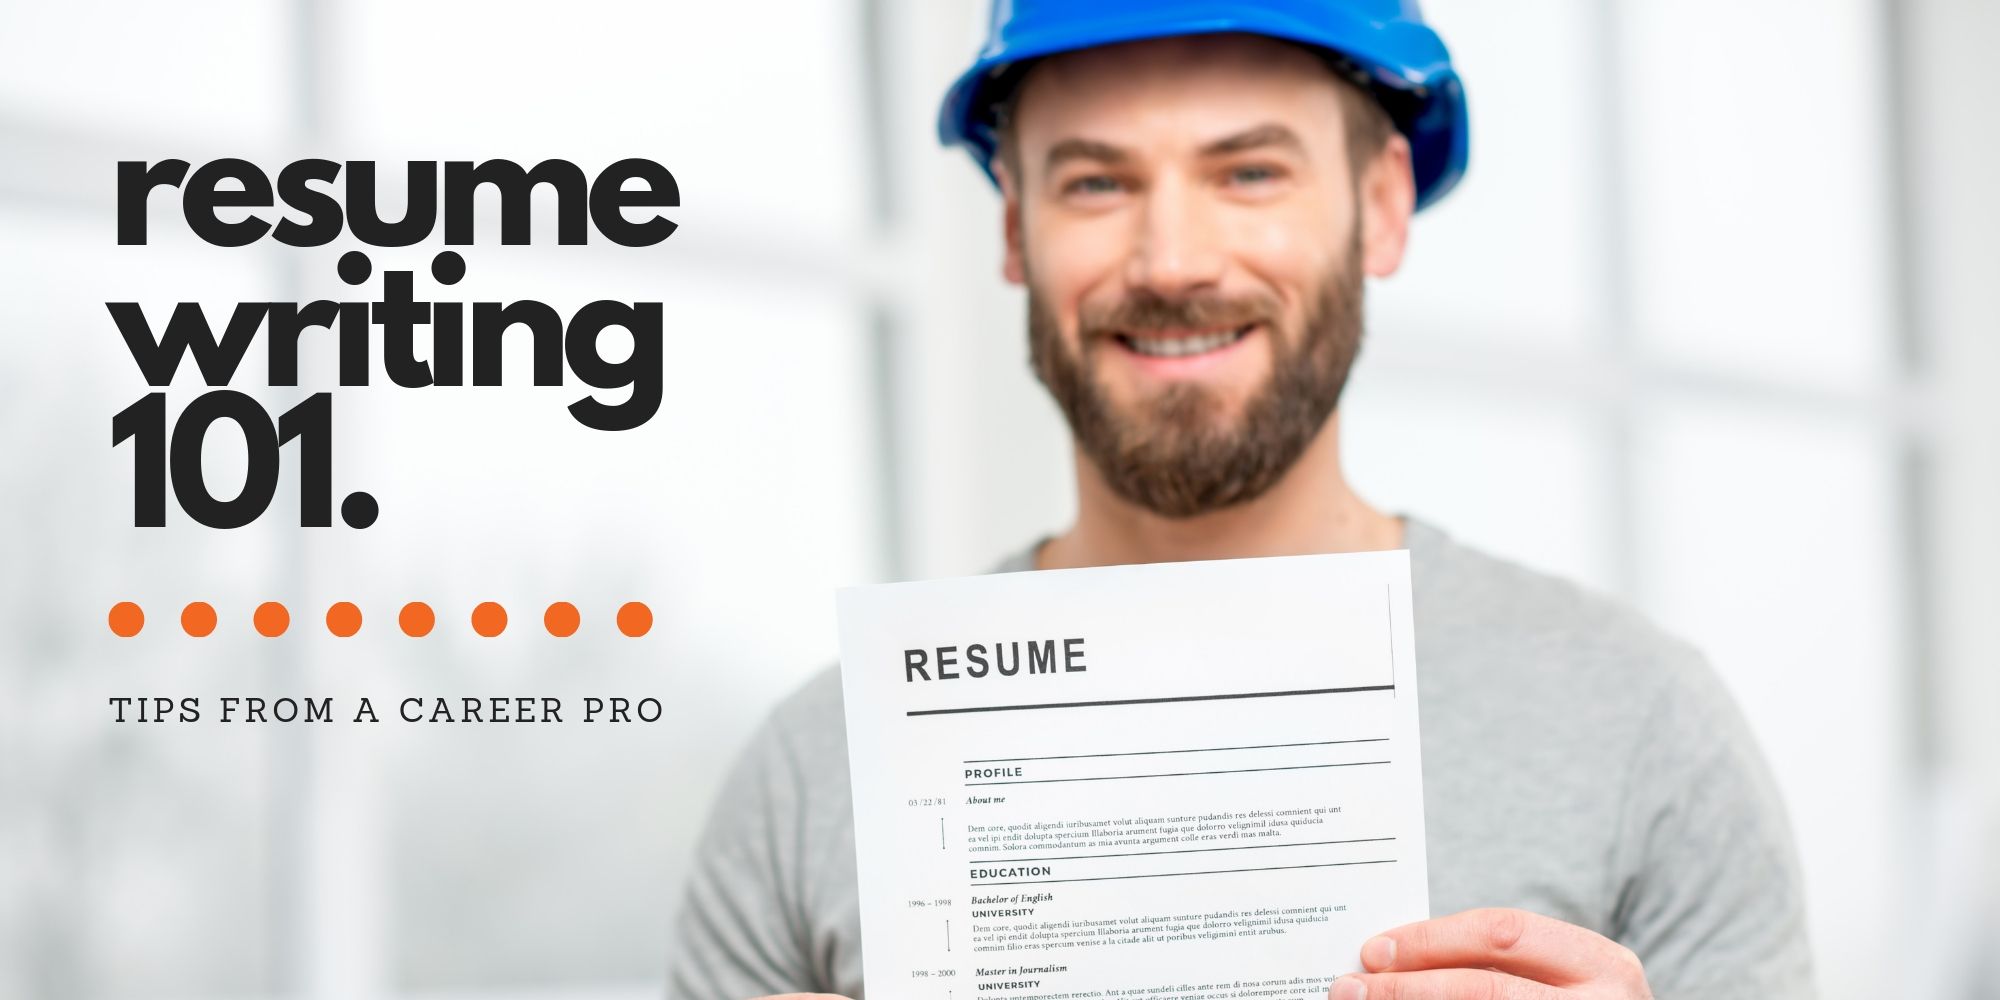 Tips For Writing A Resume Oct 2018